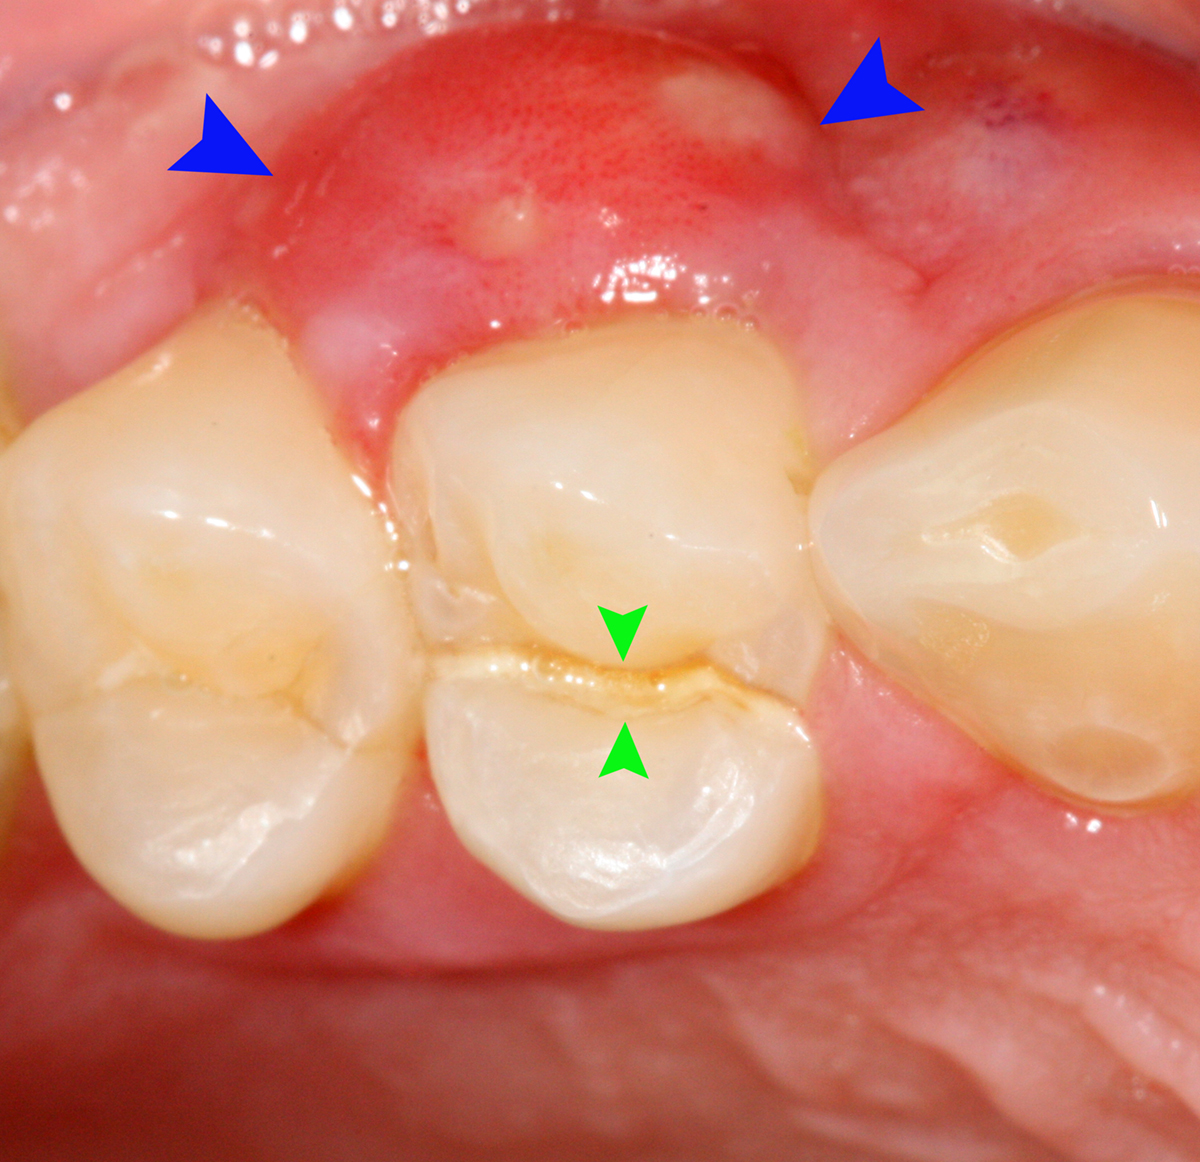 Complications of tooth abscess